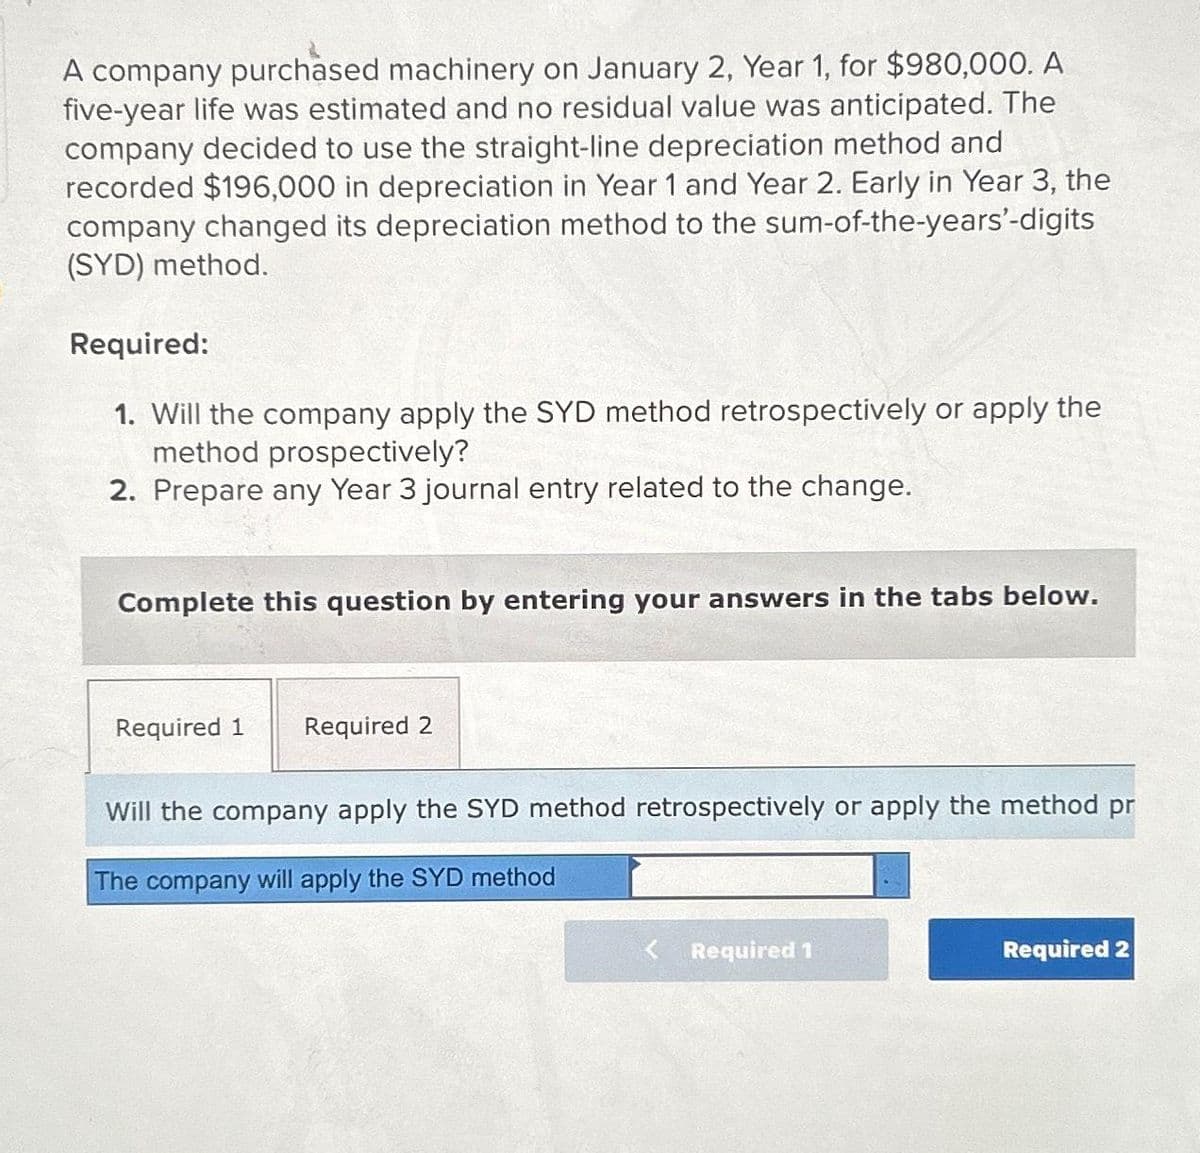 A company purchased machinery on January 2, Year 1, for $980,000. A
five-year life was estimated and no residual value was anticipated. The
company decided to use the straight-line depreciation method and
recorded $196,000 in depreciation in Year 1 and Year 2. Early in Year 3, the
company changed its depreciation method to the sum-of-the-years'-digits
(SYD) method.
Required:
1. Will the company apply the SYD method retrospectively or apply the
method prospectively?
2. Prepare any Year 3 journal entry related to the change.
Complete this question by entering your answers in the tabs below.
Required 1 Required 2
Will the company apply the SYD method retrospectively or apply the method pr
The company will apply the SYD method
Required 1
Required 2